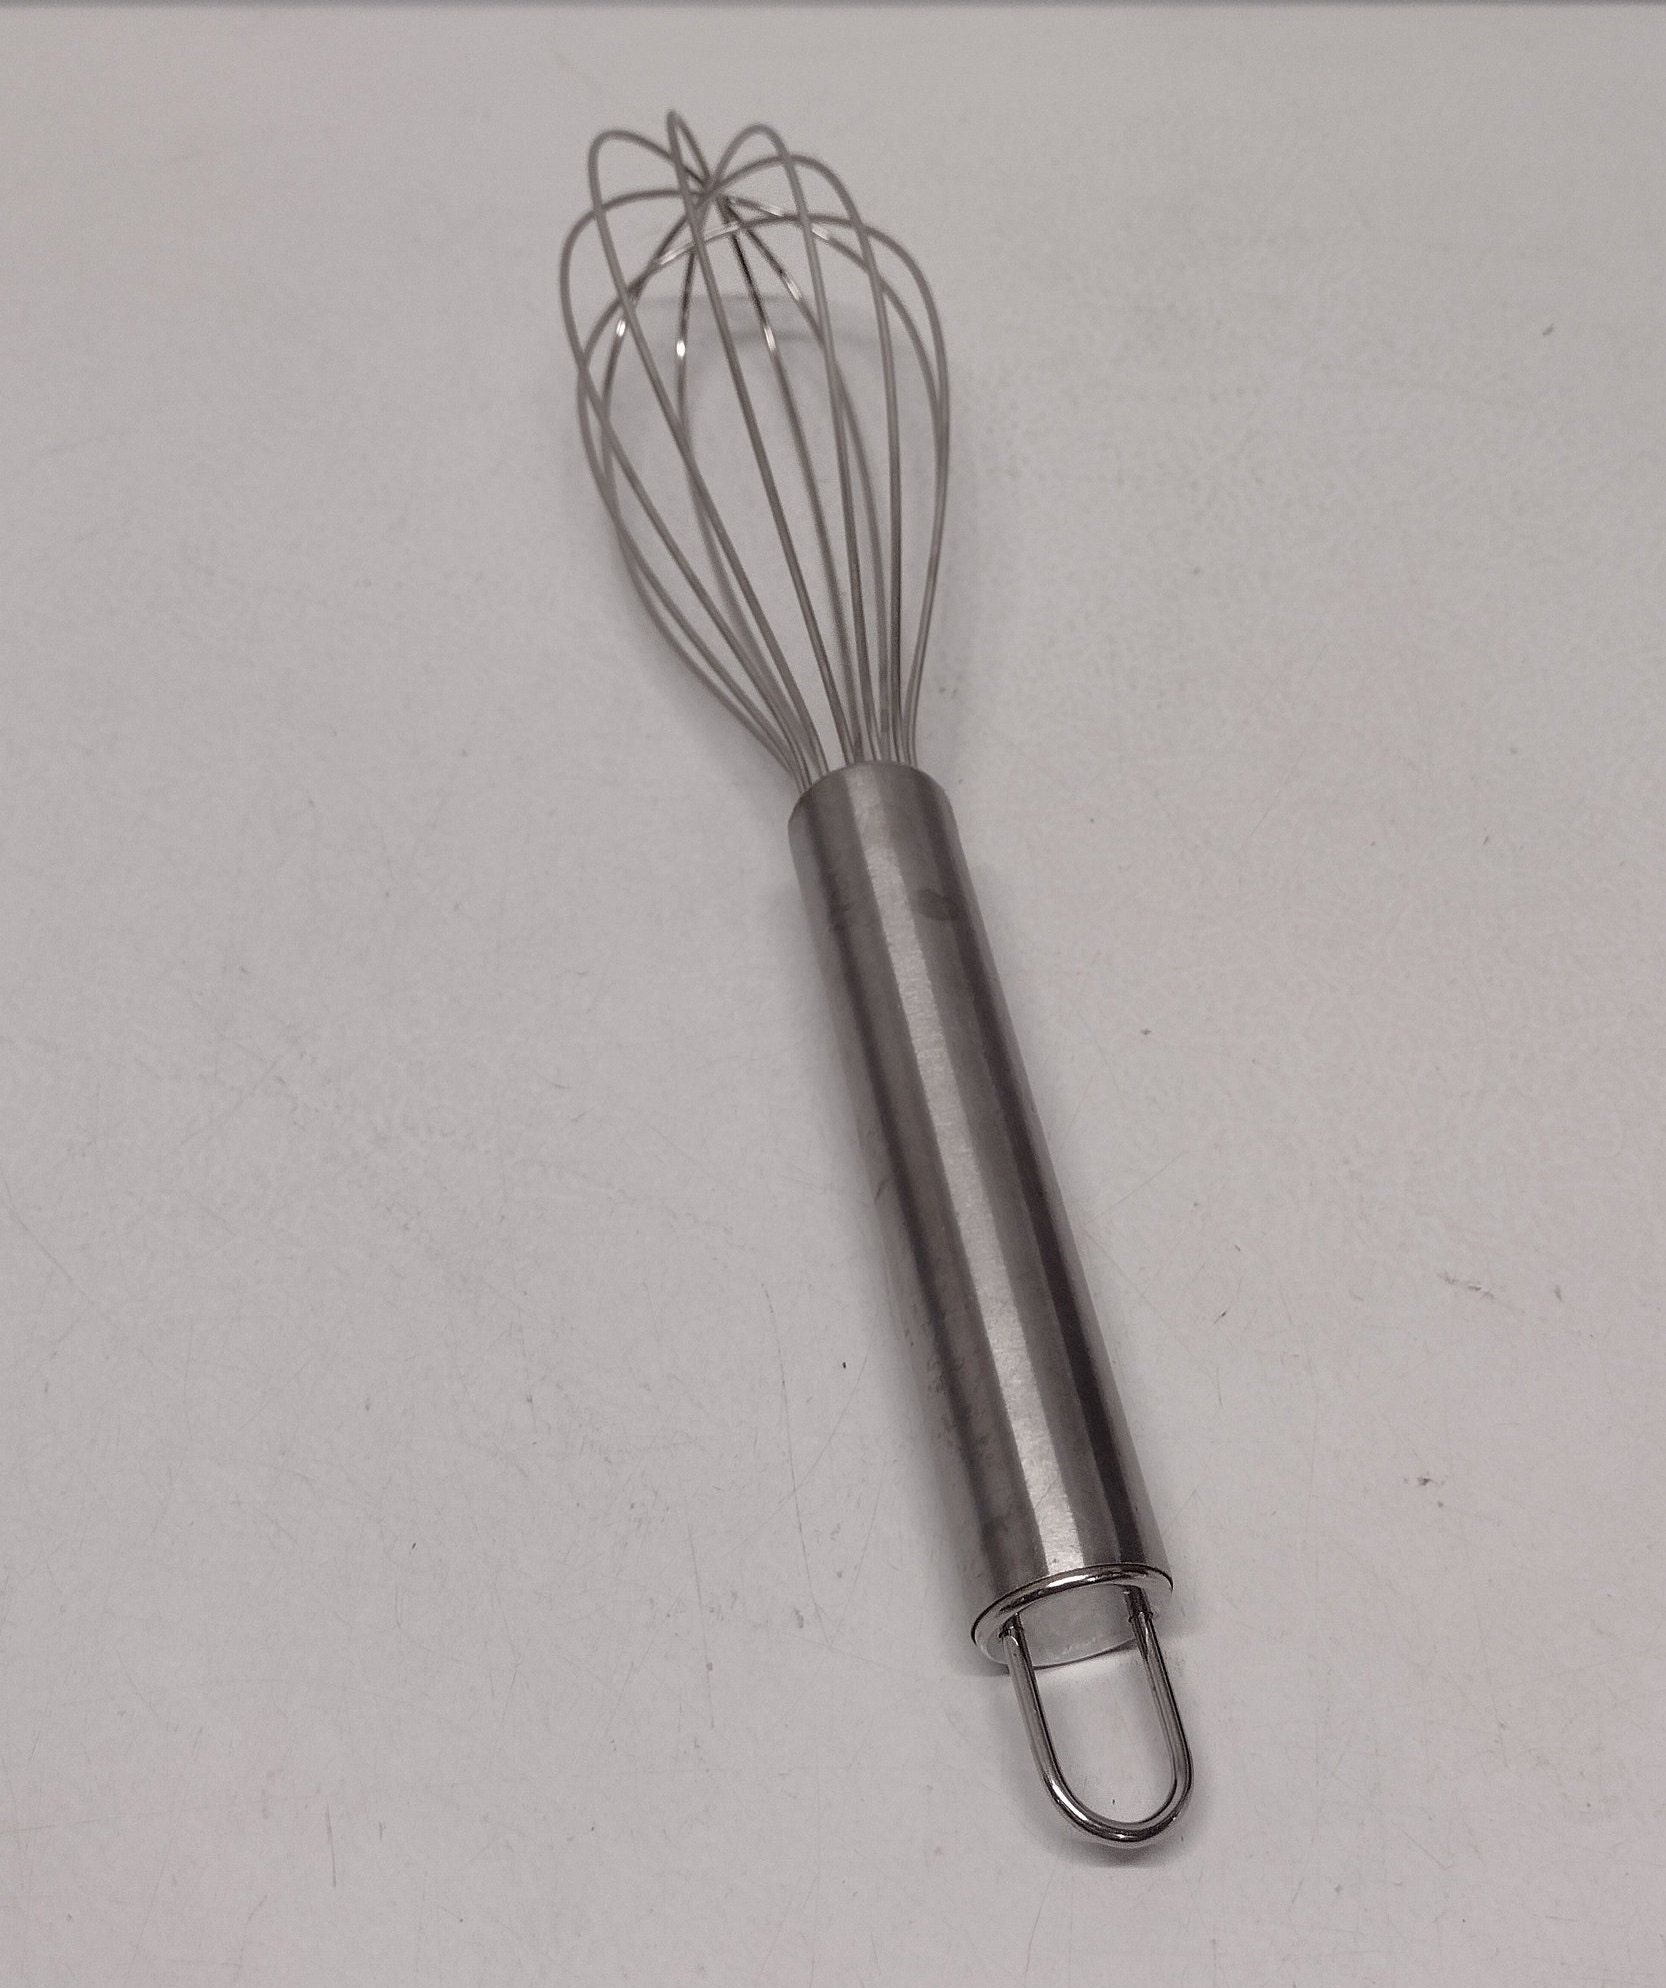 Stainless Steel Small Whisk for Cheese, Coffee, Eggs, Very Handy (6 Inches)